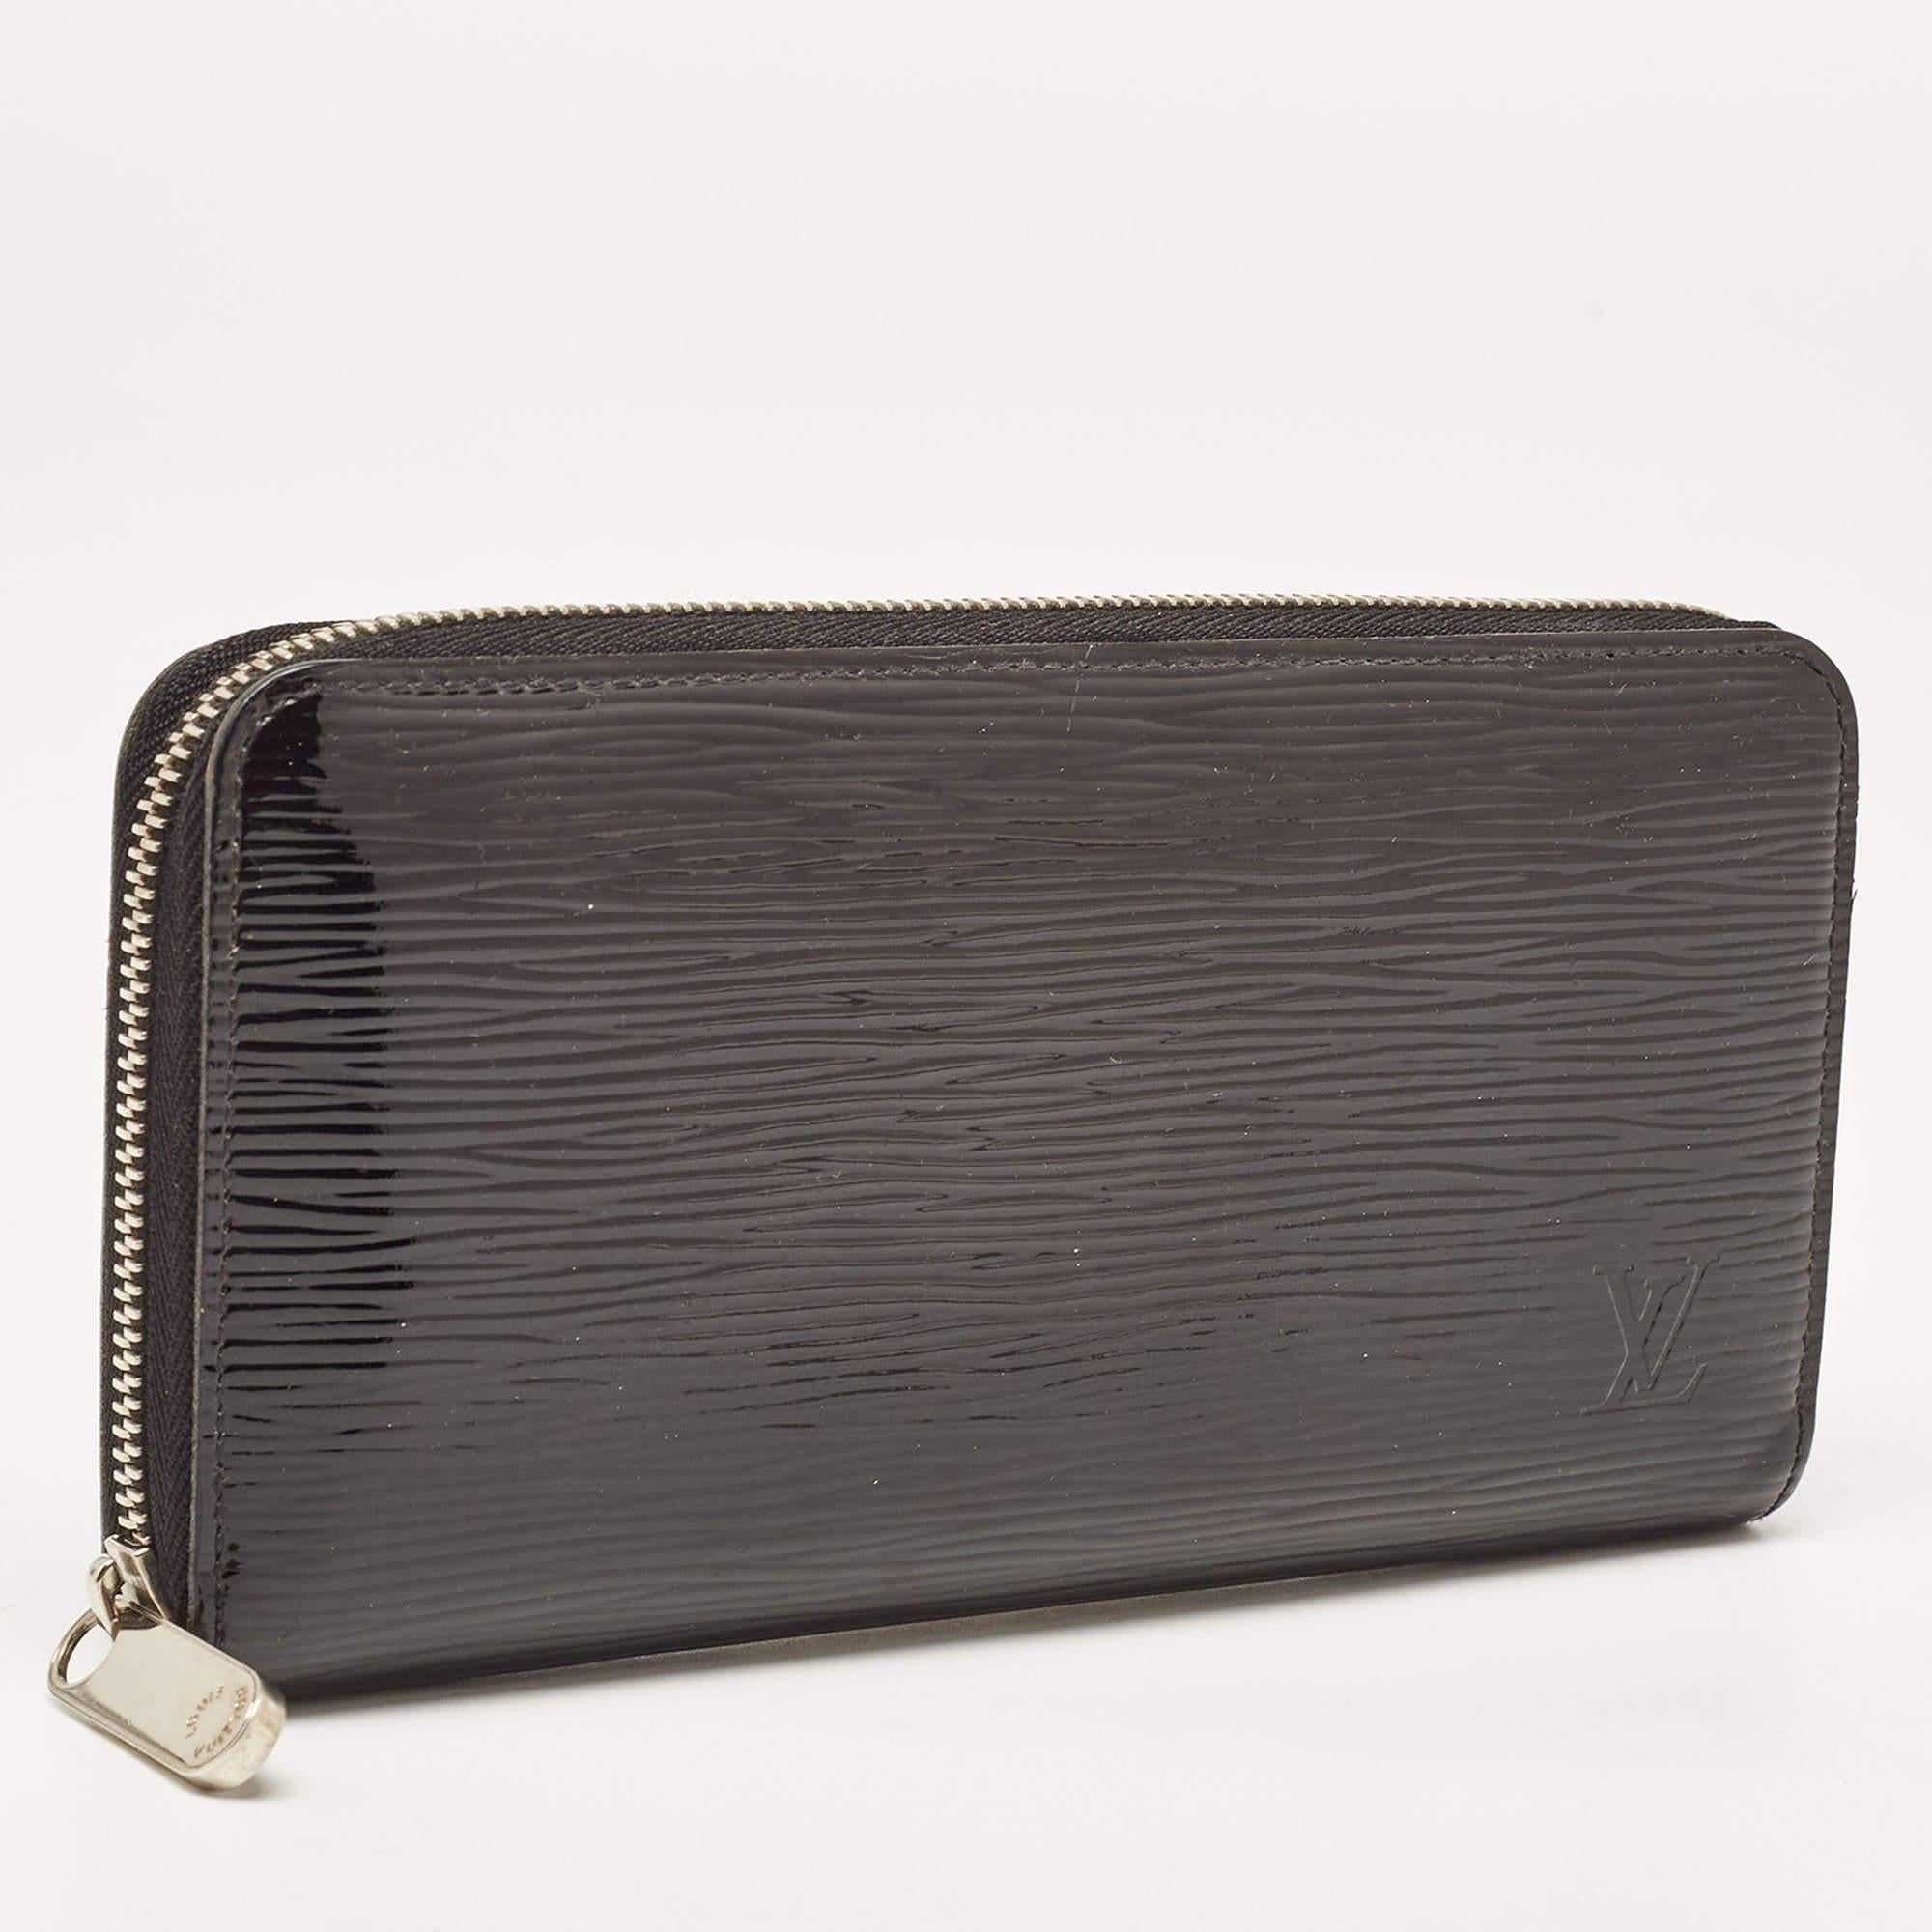 This Louis Vuitton Zippy wallet is conveniently designed for everyday use. Crafted from Electric Epi patent leather, the wallet has a wide zip closure that opens to reveal multiple slots, leather-lined compartments and a zip pocket for you to neatly